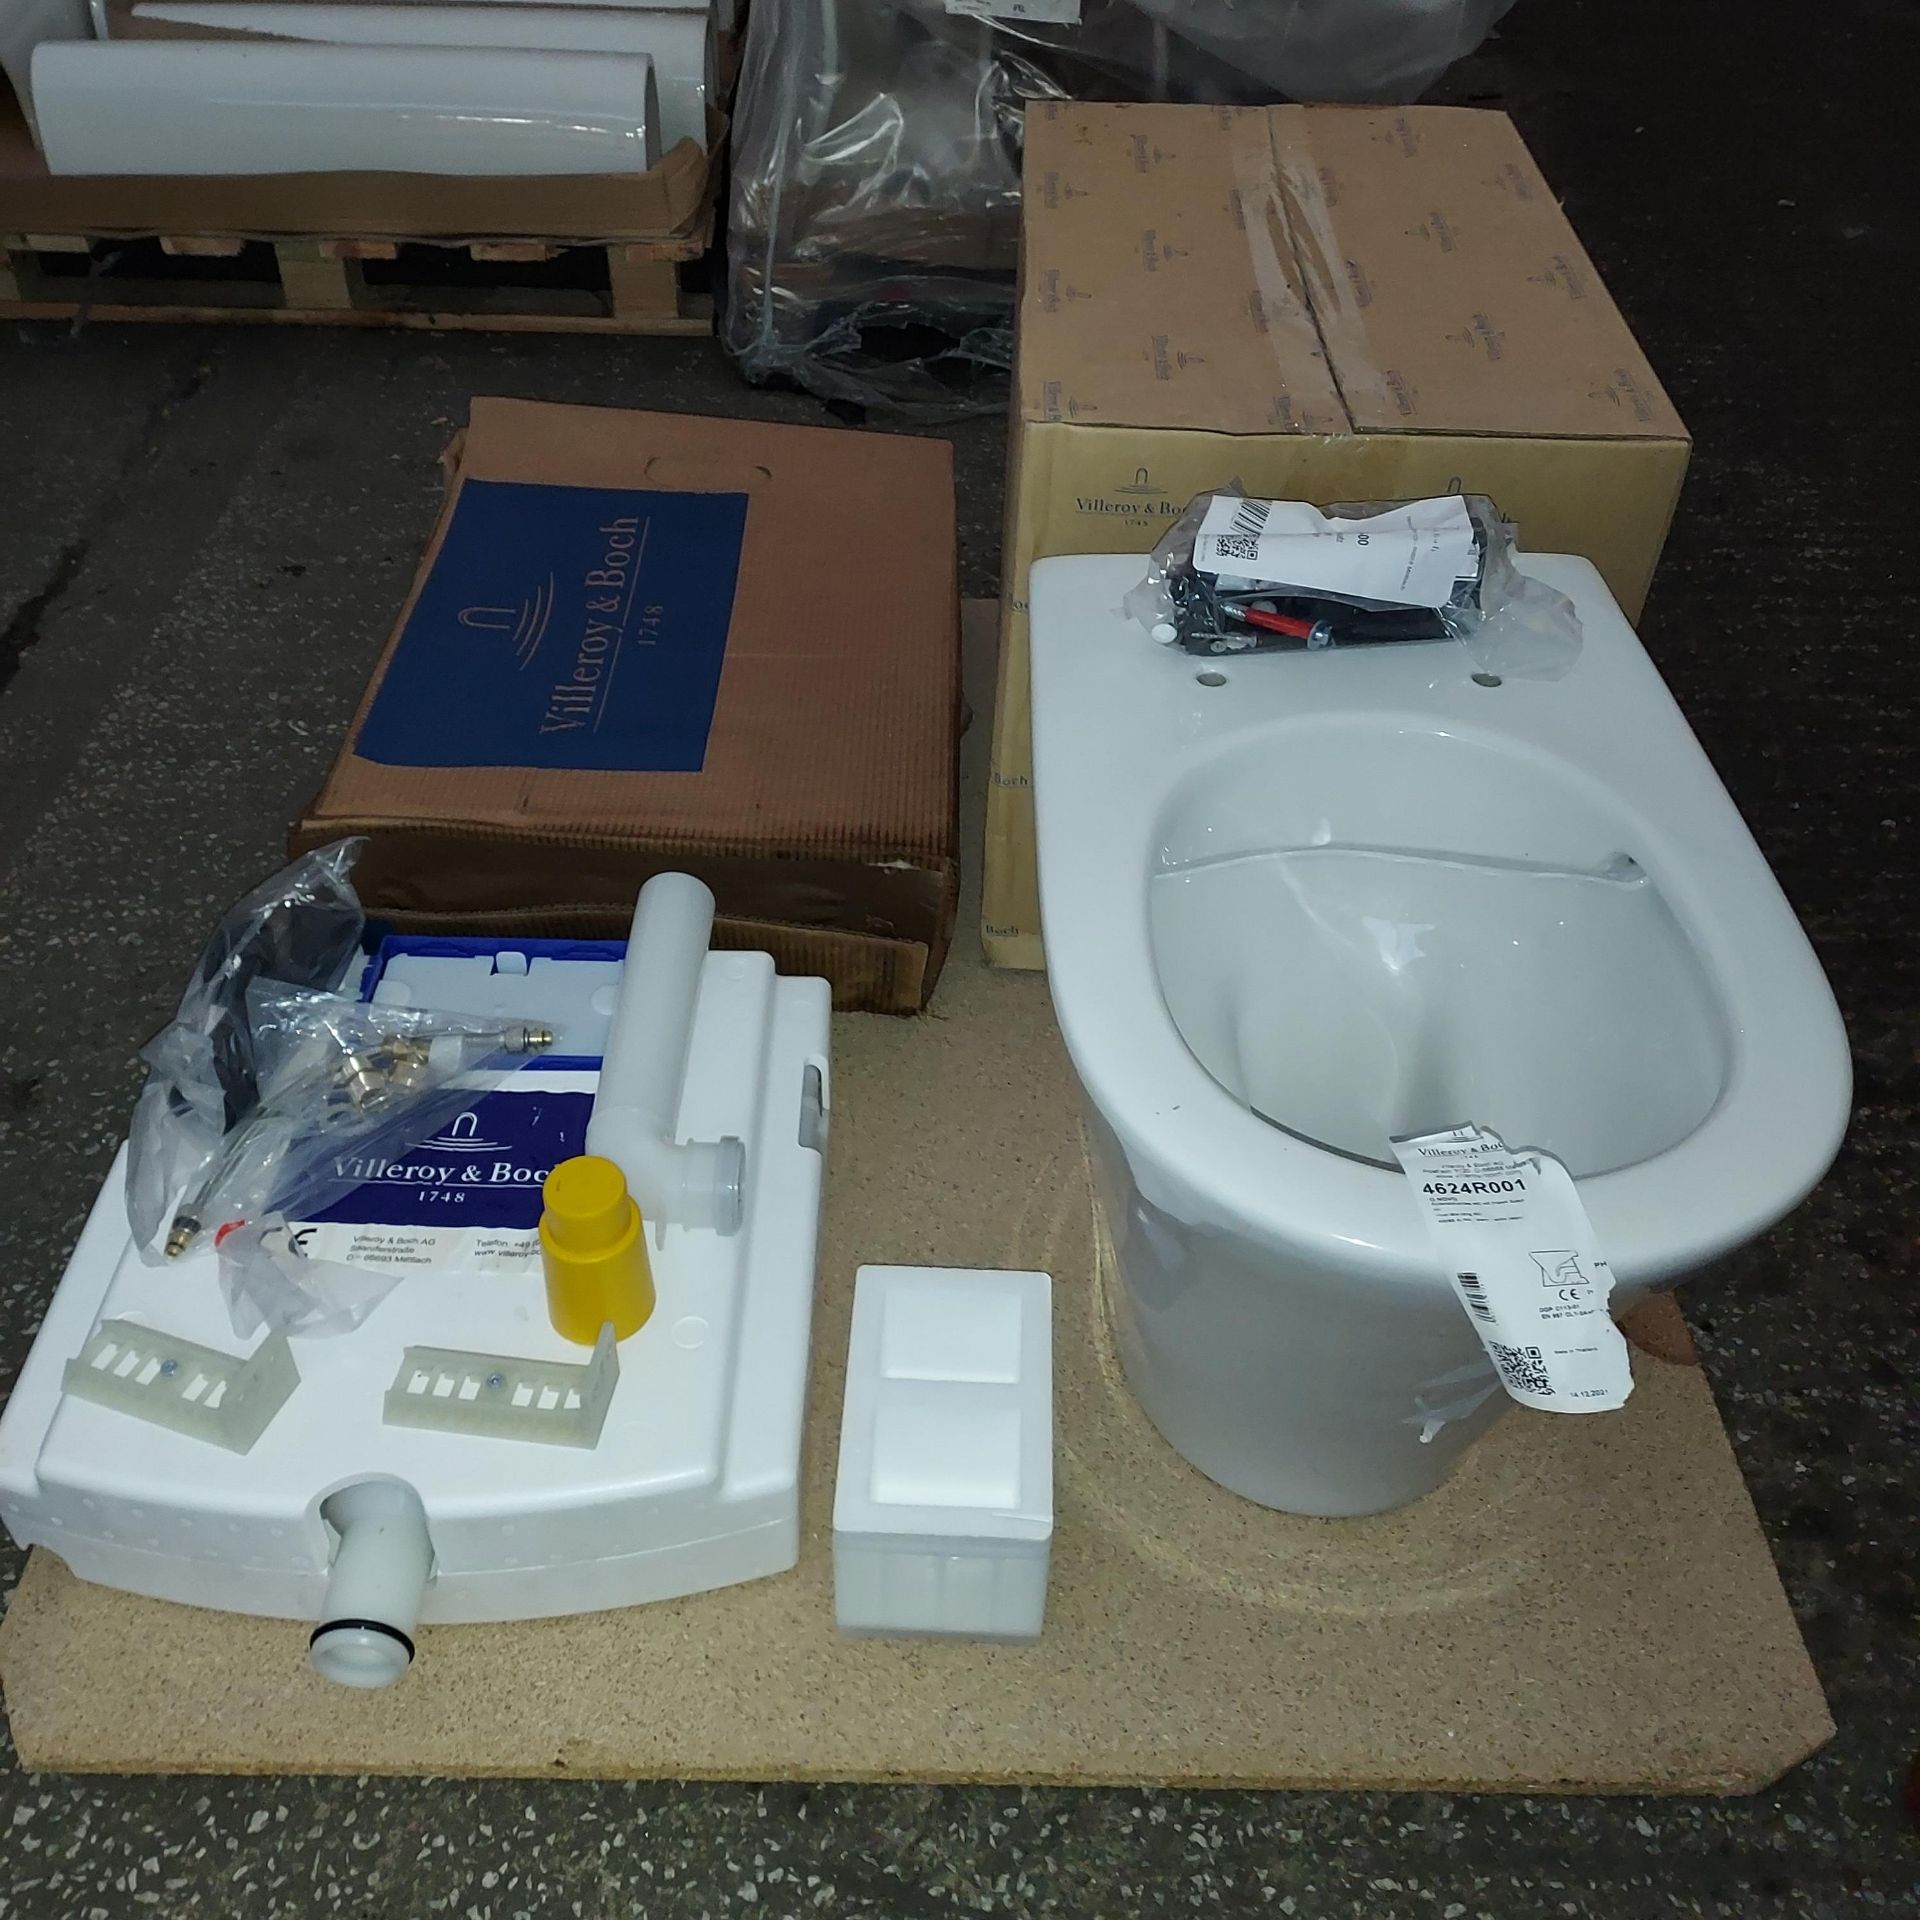 1 X BOXED VILLEROY AND BOCH FLOOR STANDING WC (4624R001) AND 1 X BOXED VILEROY AND BOCH CONCEALED